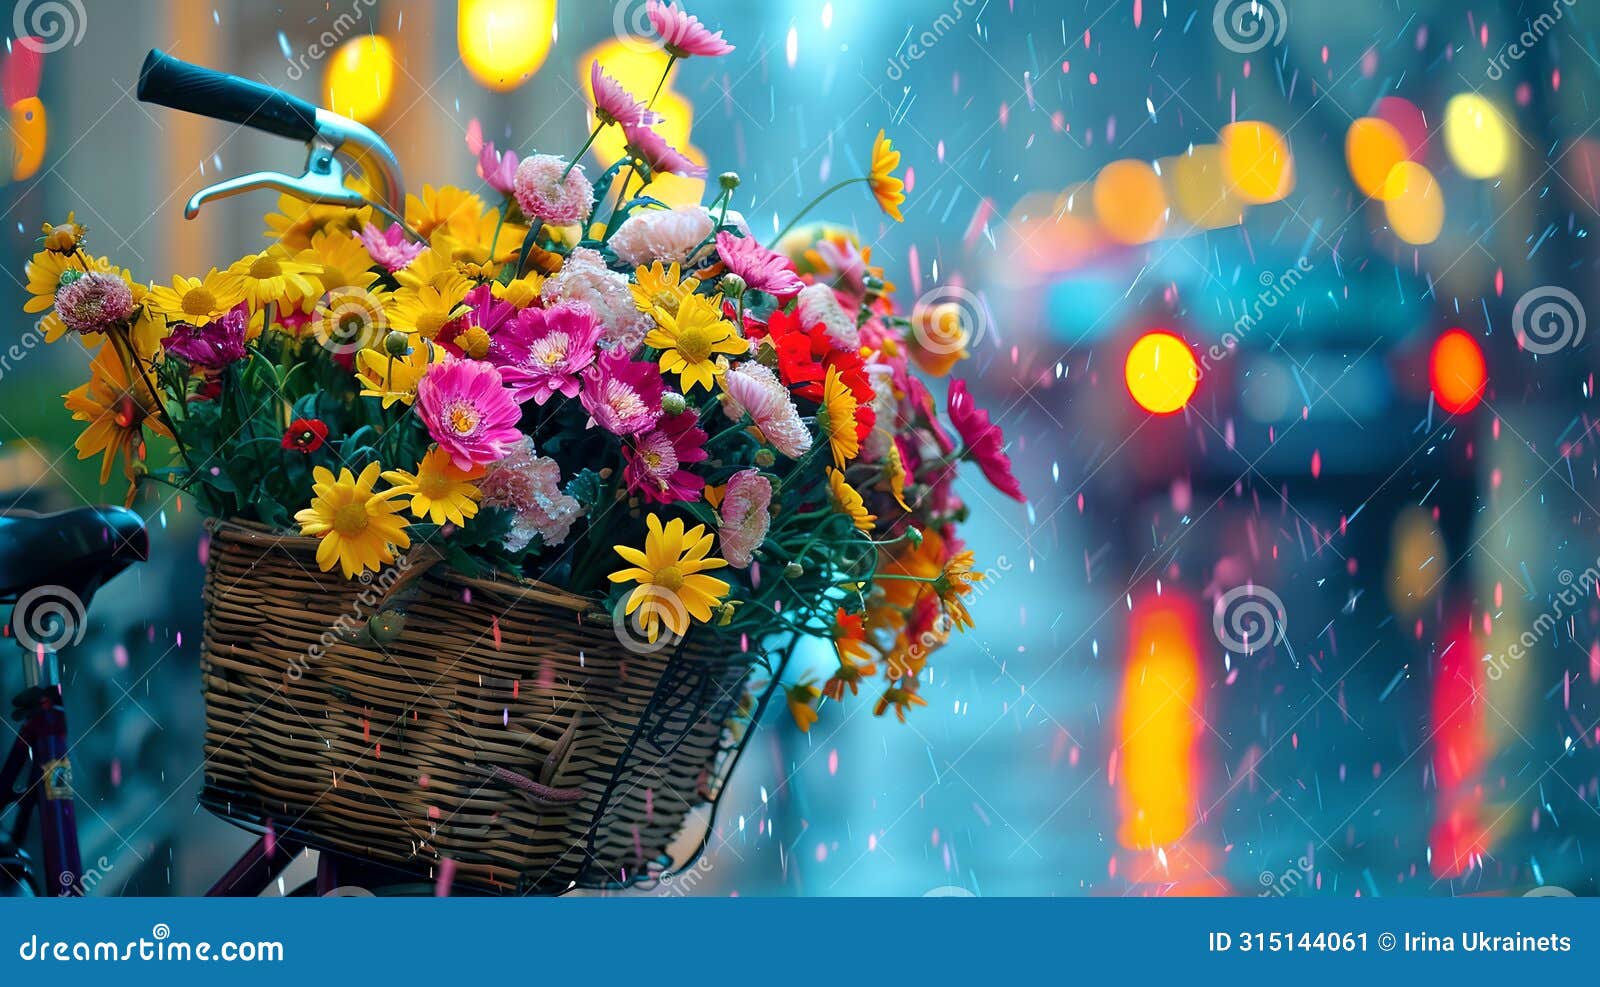 vibrant bouquet in a bike basket on rainy city street. urban life, seasonal flowers, and freshness. atmospheric and